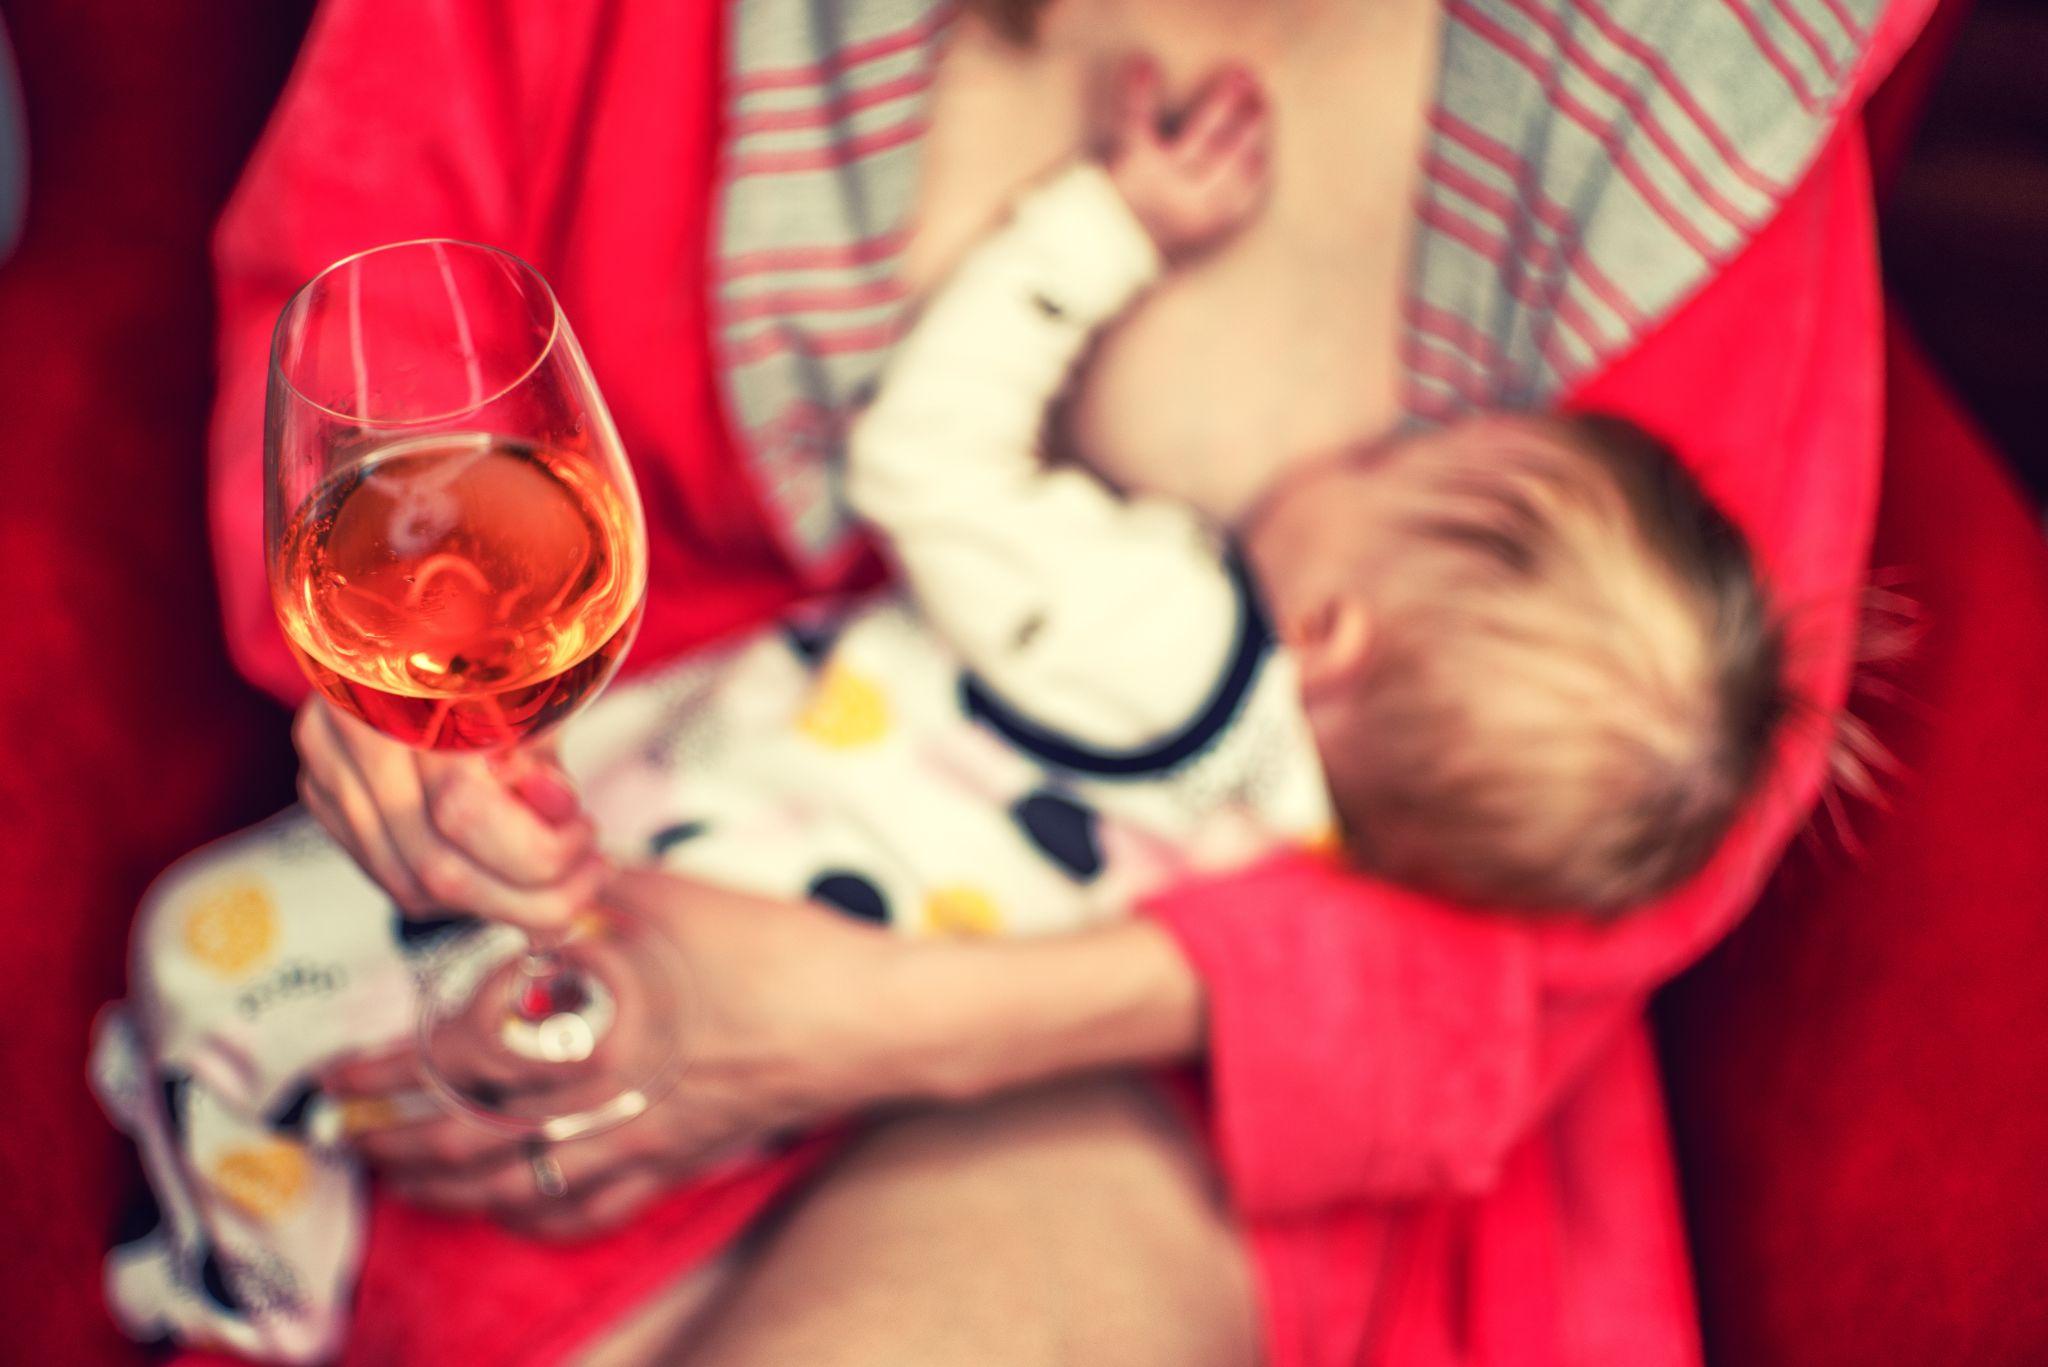 new mom with newborn and glass of wine